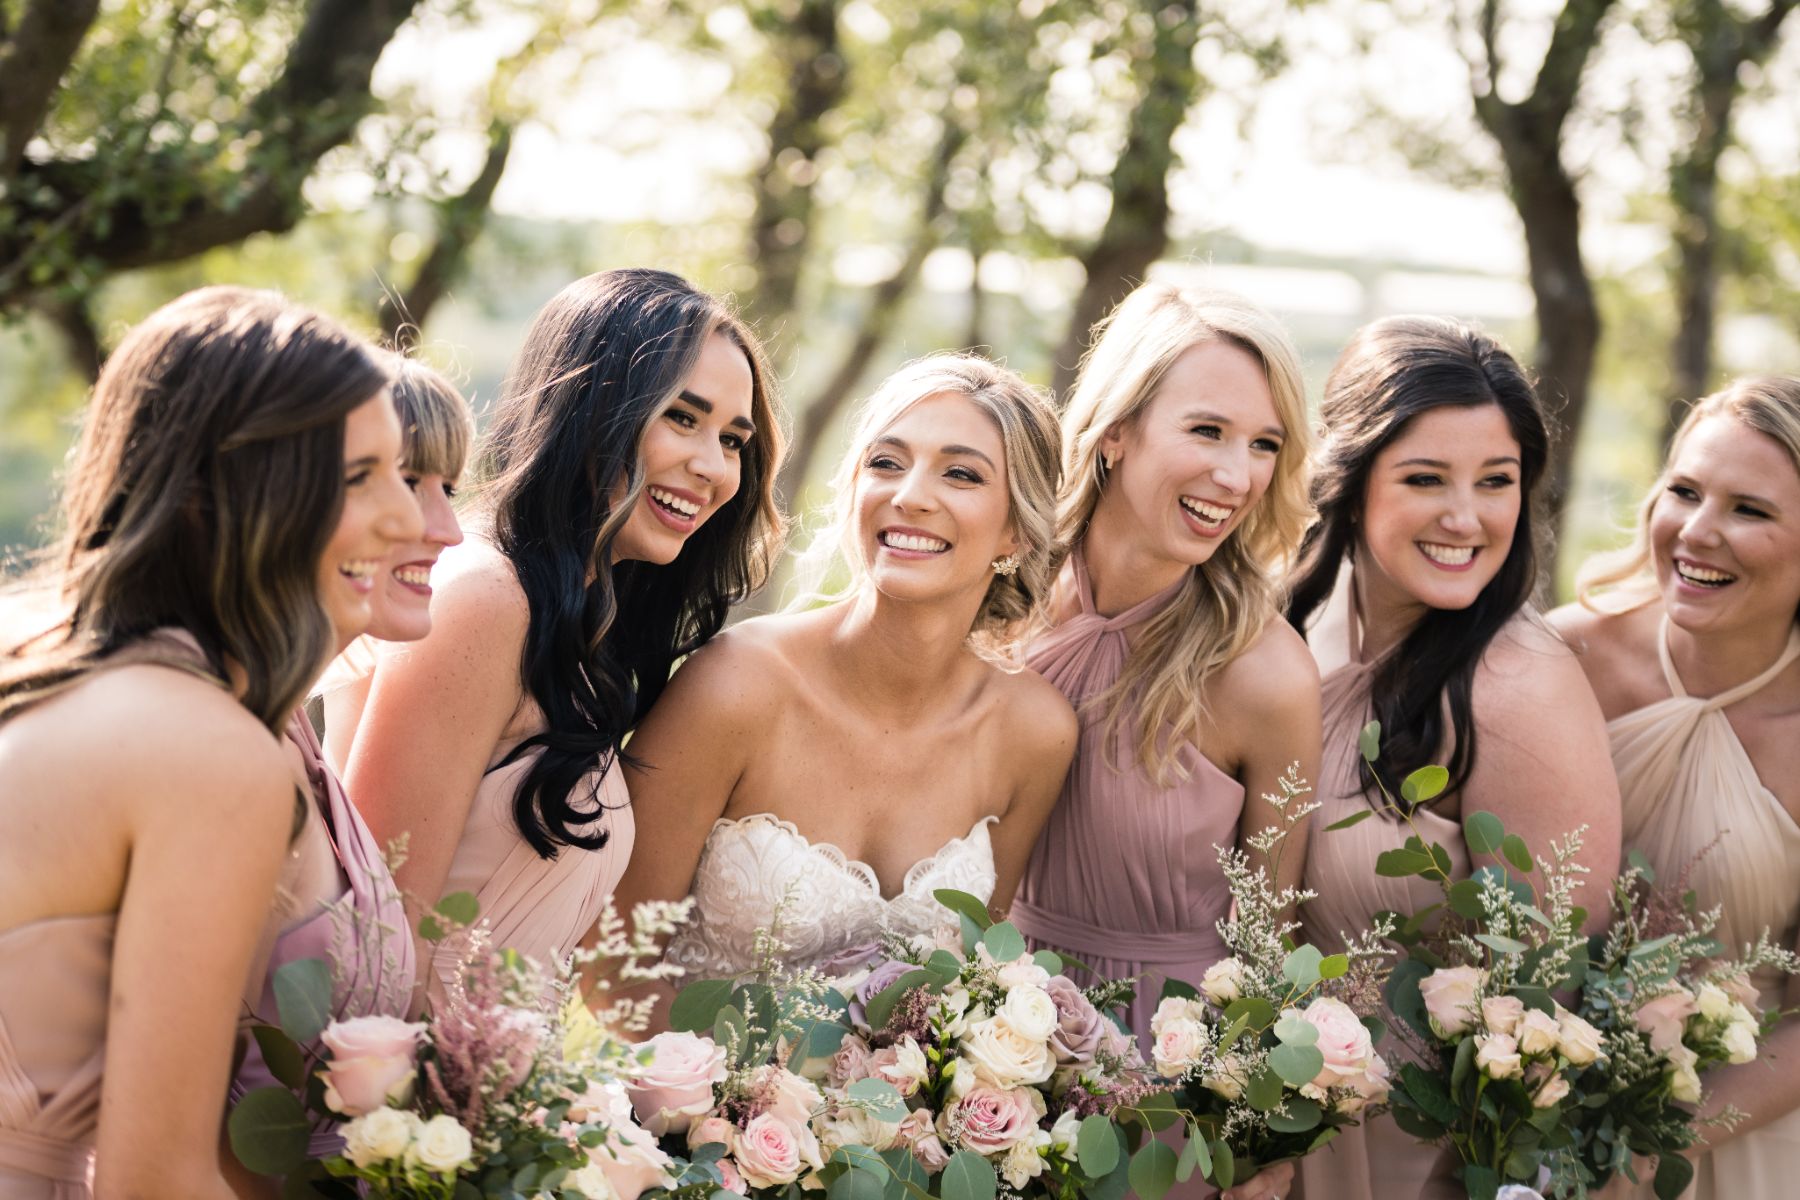 A bride is smiling and looking at her bridesmaids, whom are also smiling and laughing together. The sun is illuminating their hair for a soft serene image.